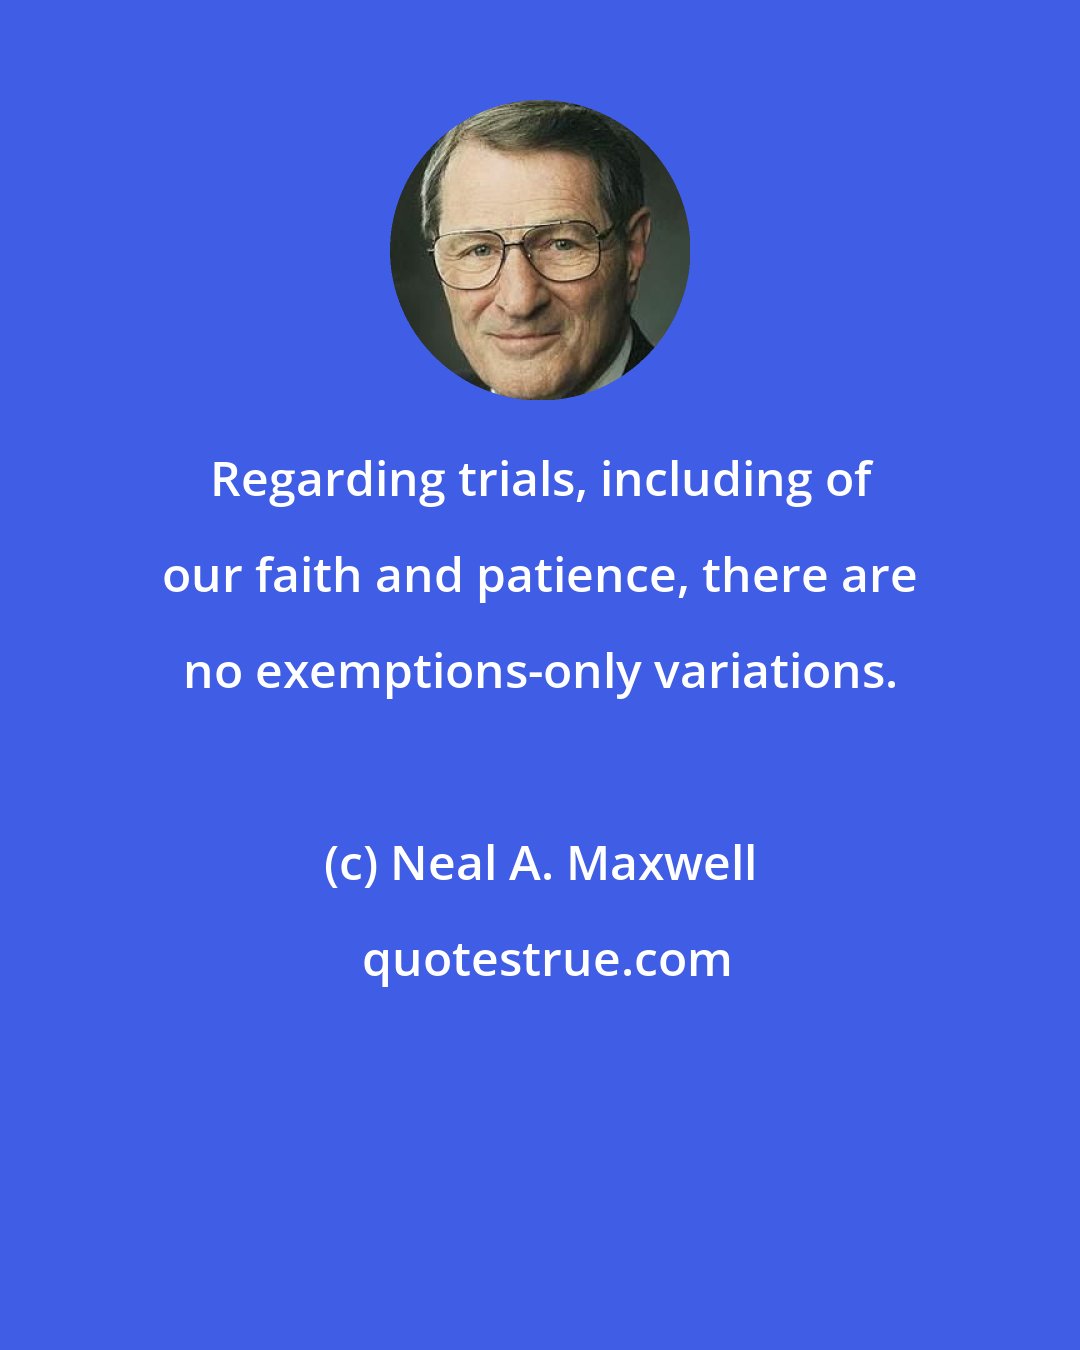 Neal A. Maxwell: Regarding trials, including of our faith and patience, there are no exemptions-only variations.